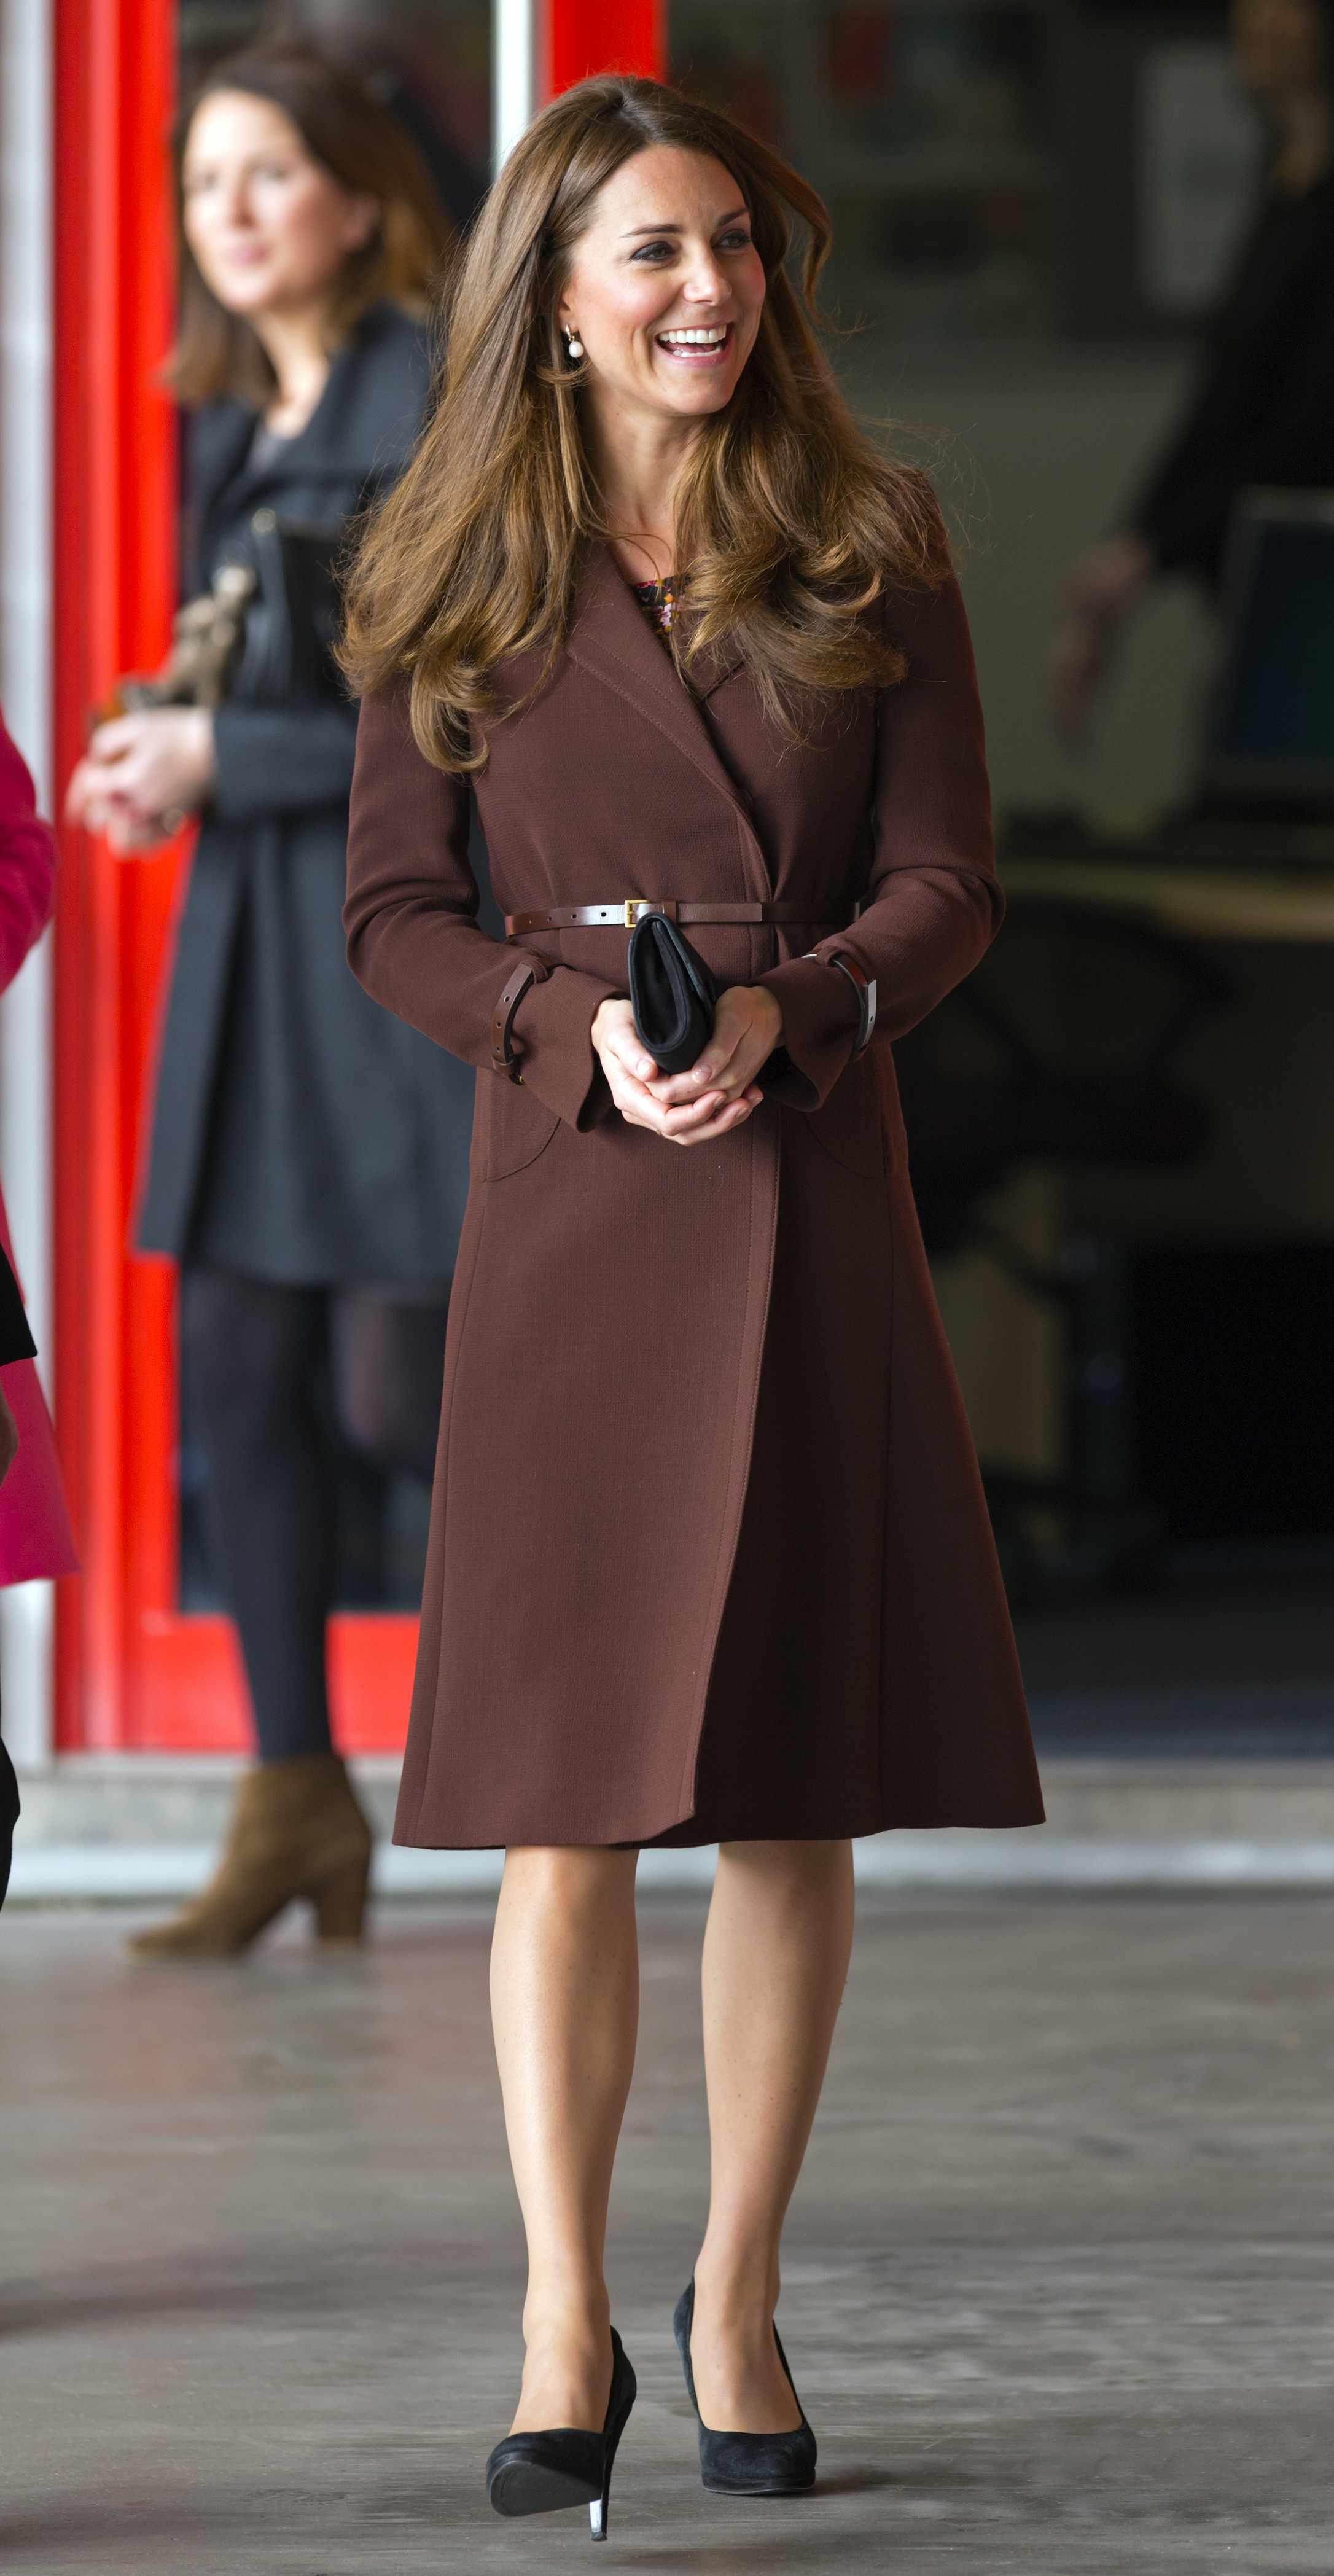 Kate Middleton's most stylish maternity moments to date | GRIMSBY, UNITED KINGDOM - MARCH 05: (EMBARGOED FOR PUBLICATION IN UK NEWSPAPERS UNTIL 48 HOURS AFTER CREATE DATE AND TIME) Catherine, Duchess of Cambridge visits Peaks Lane Fire Station whilst carrying out a day of engagements on March 5, 2013 in Grimsby, England. (Photo by Indigo/Getty Images)